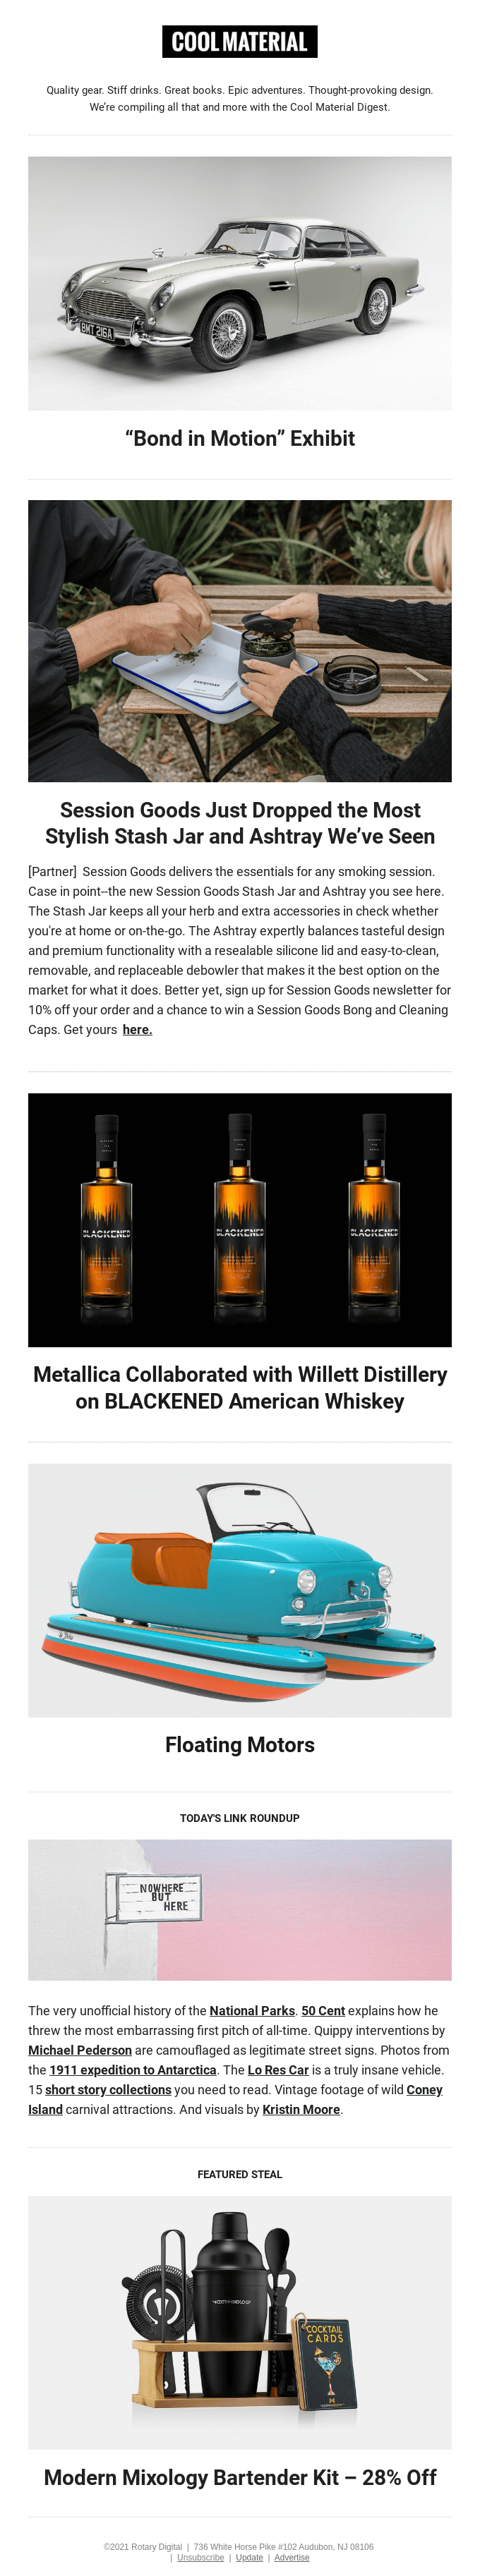 Metallica Collaborated with Willett Distillery on BLACKENED American Whiskey ++